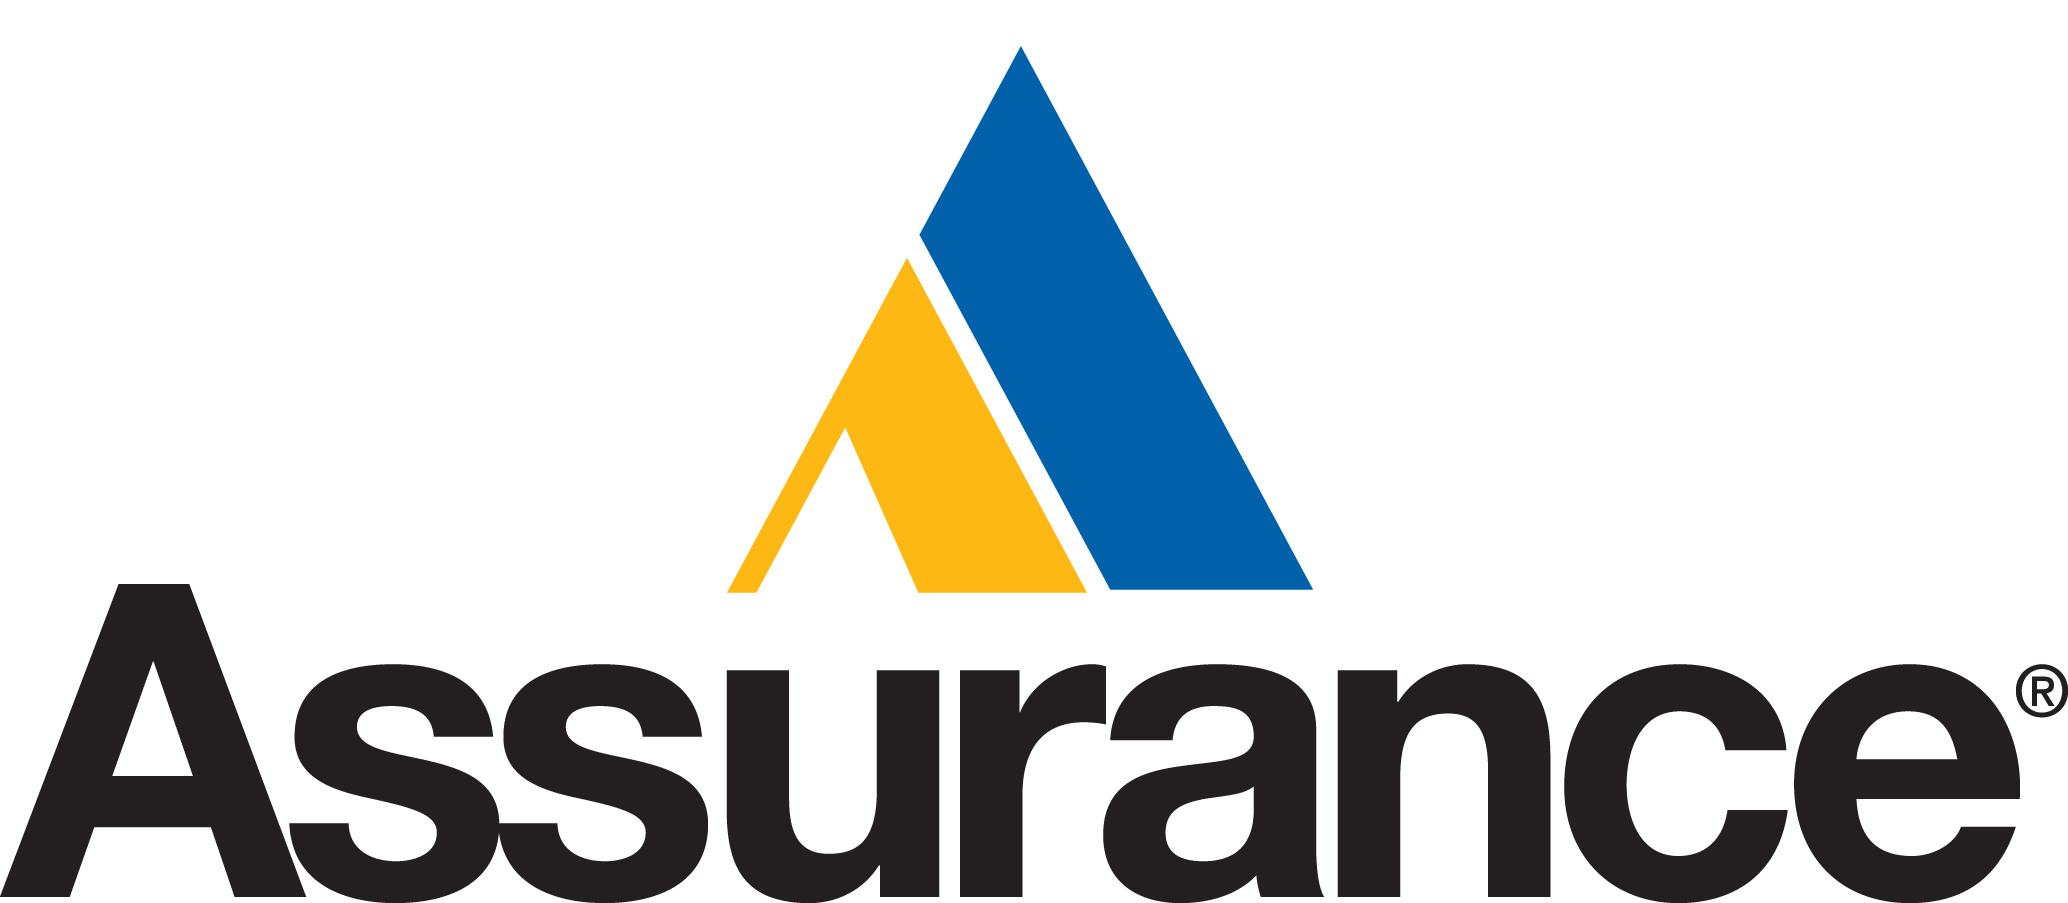 Assurance, an independent insurance brokerage with offices near St. Louis and Chicago, has been named second for mid-sized companies on the list of “Top Workplaces” by The Chicago Tribune.